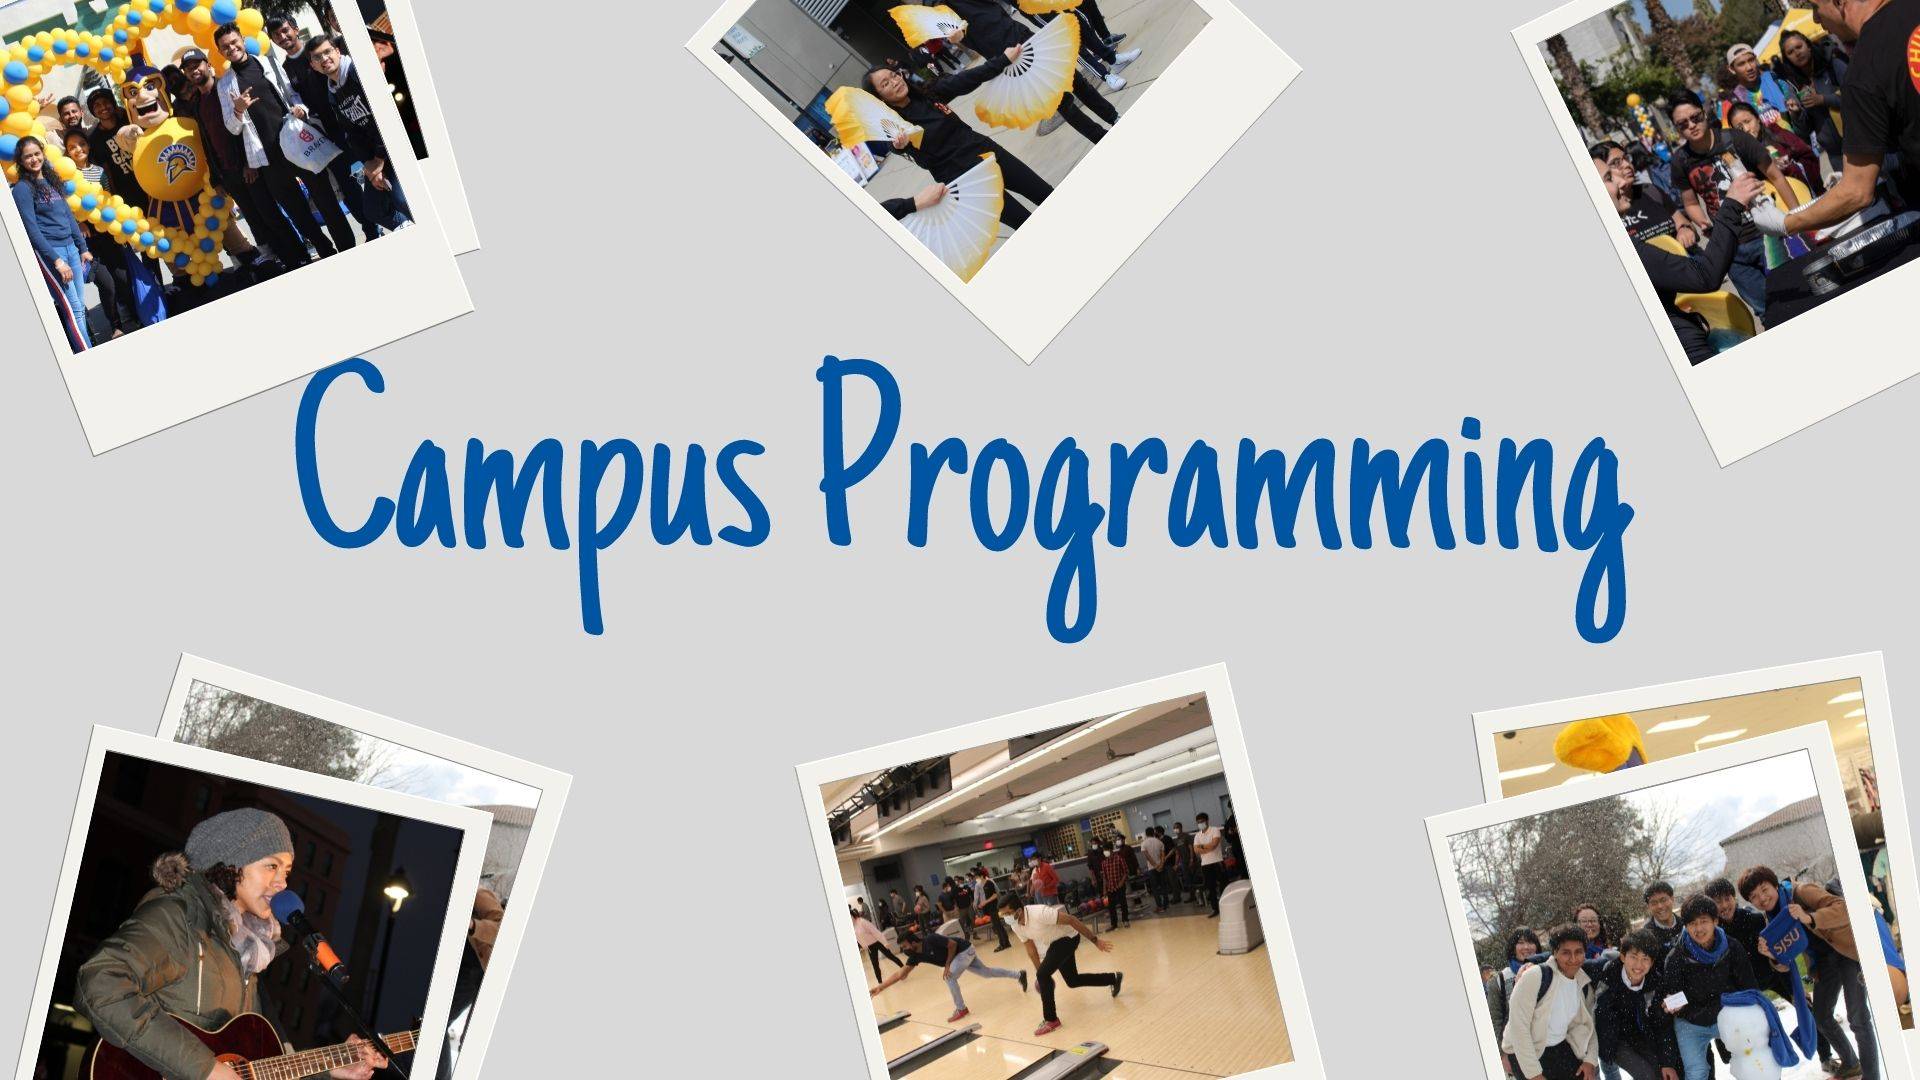 Campus Programming graphic with snapshots of students at various campus events